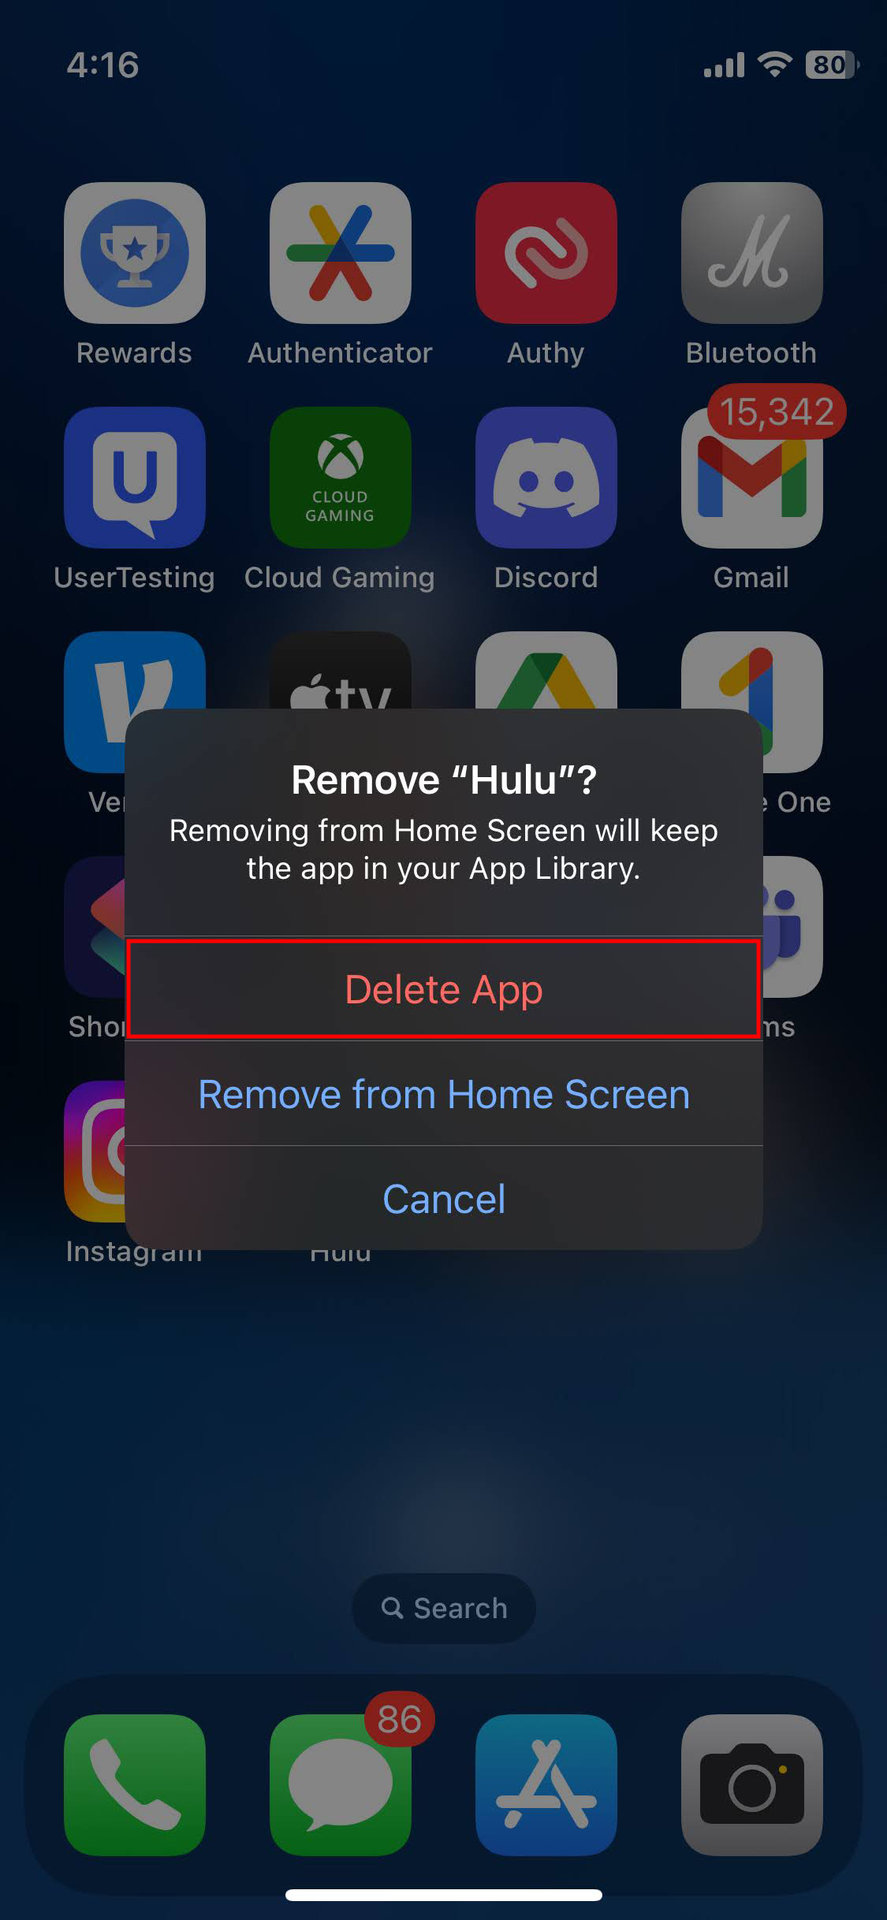 How to uninstall Hulu app on iPhone (3)